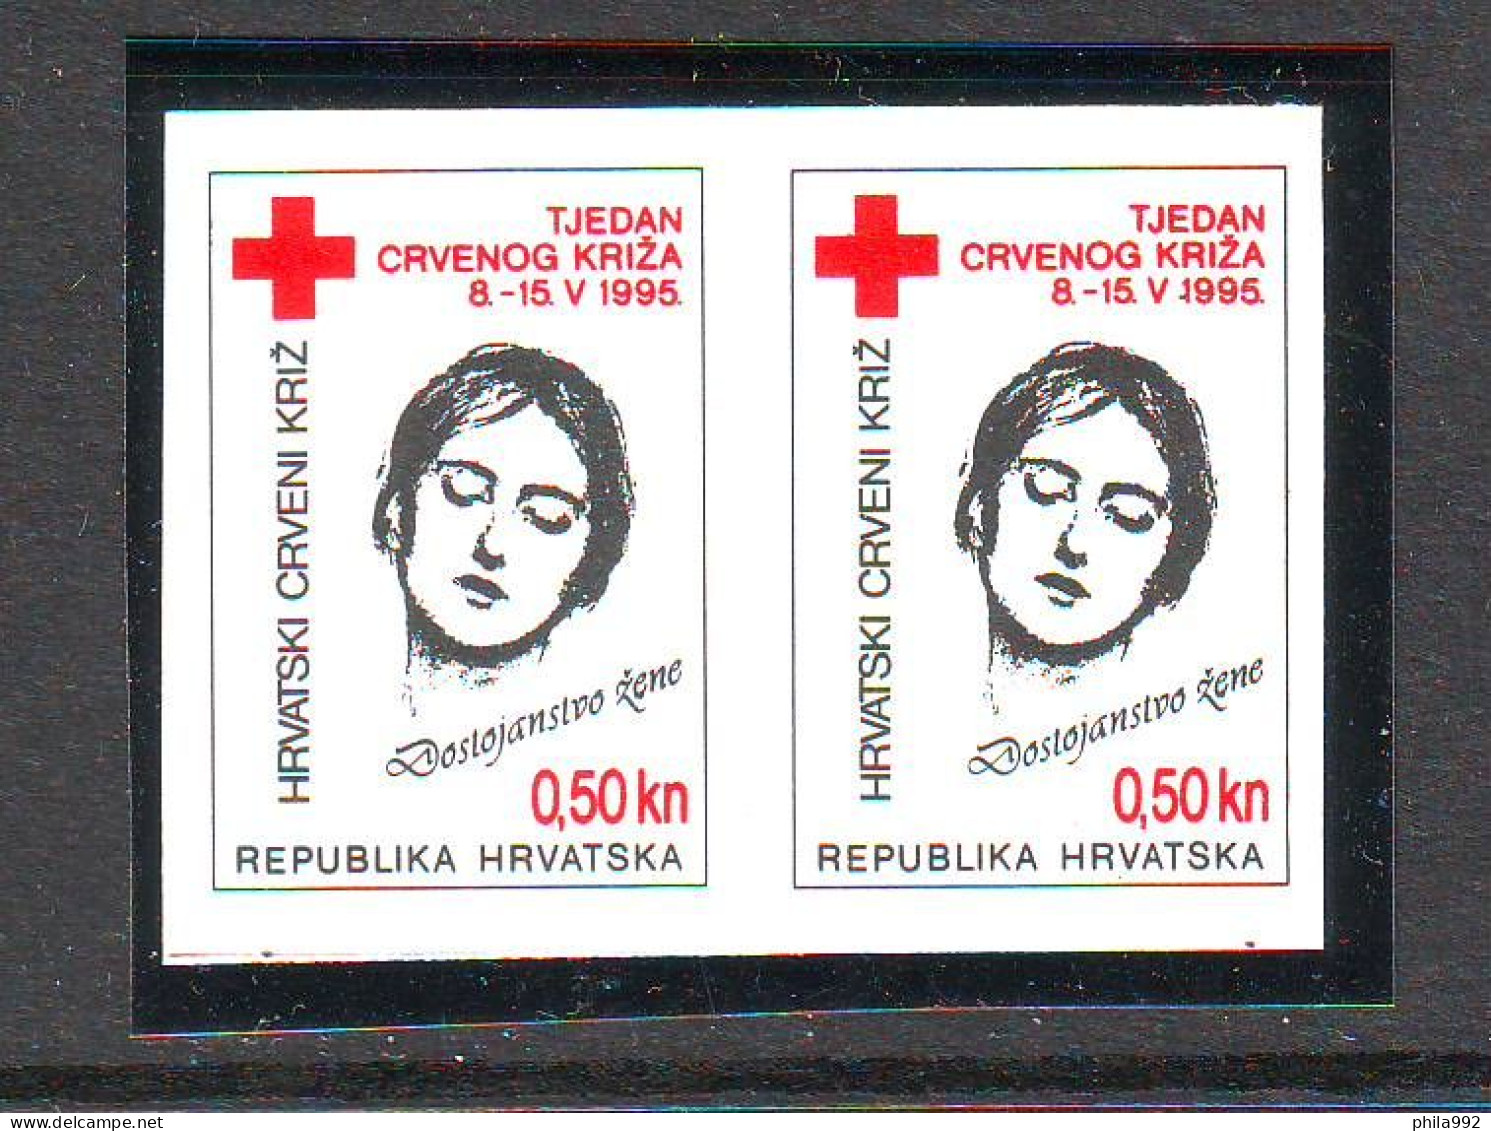 Croatia 1995 Charity Stamp Mi.No.63 RED CROSS  Imperforated Pair  MNH - Kroatien